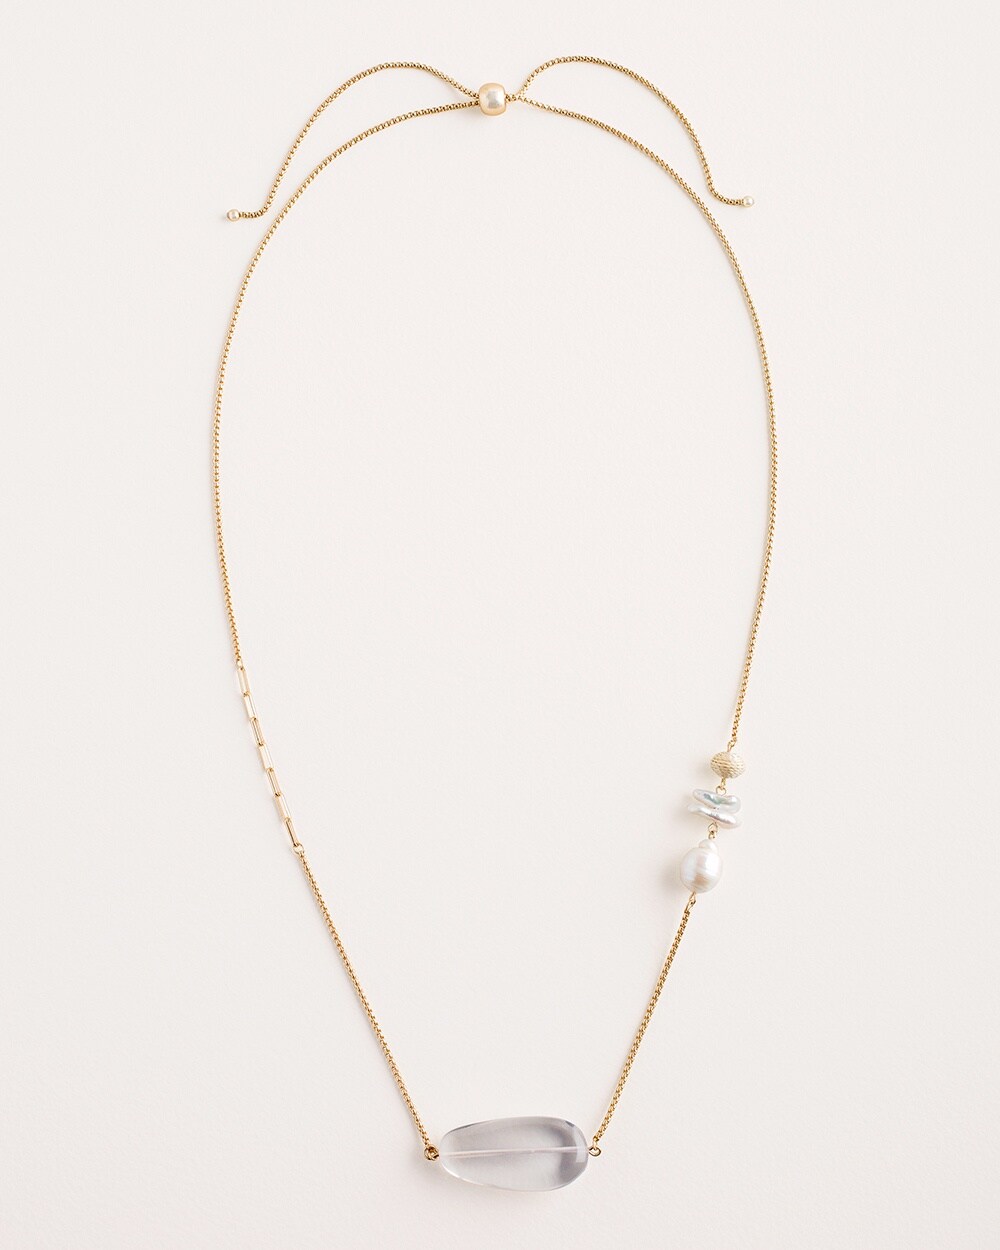 Convertible Neutral Single-Strand Necklace